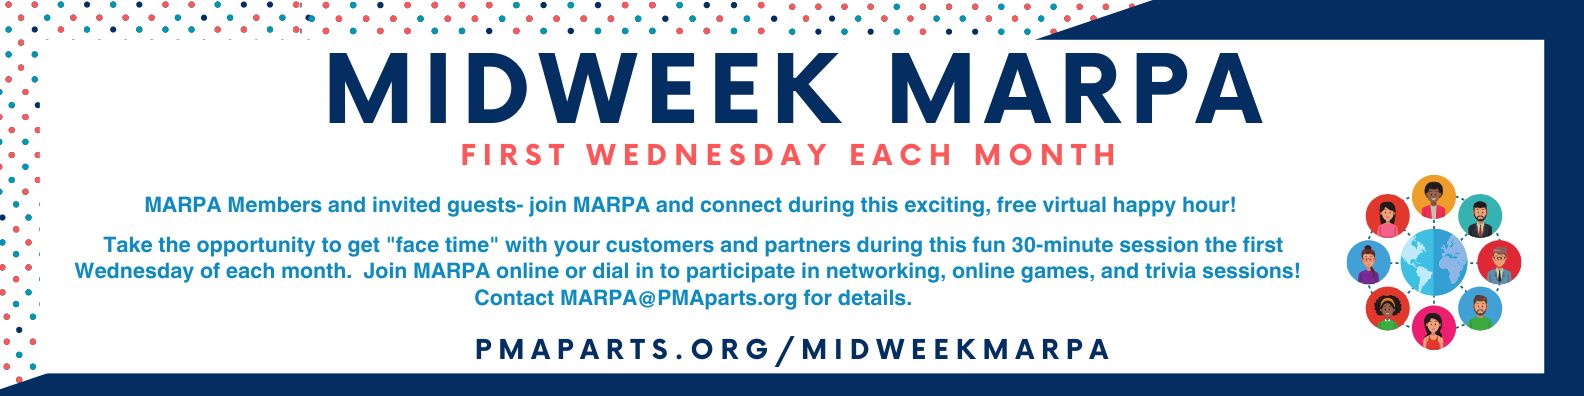 MARPA Members- Midweek MARPA on the First Wednesday of the Month